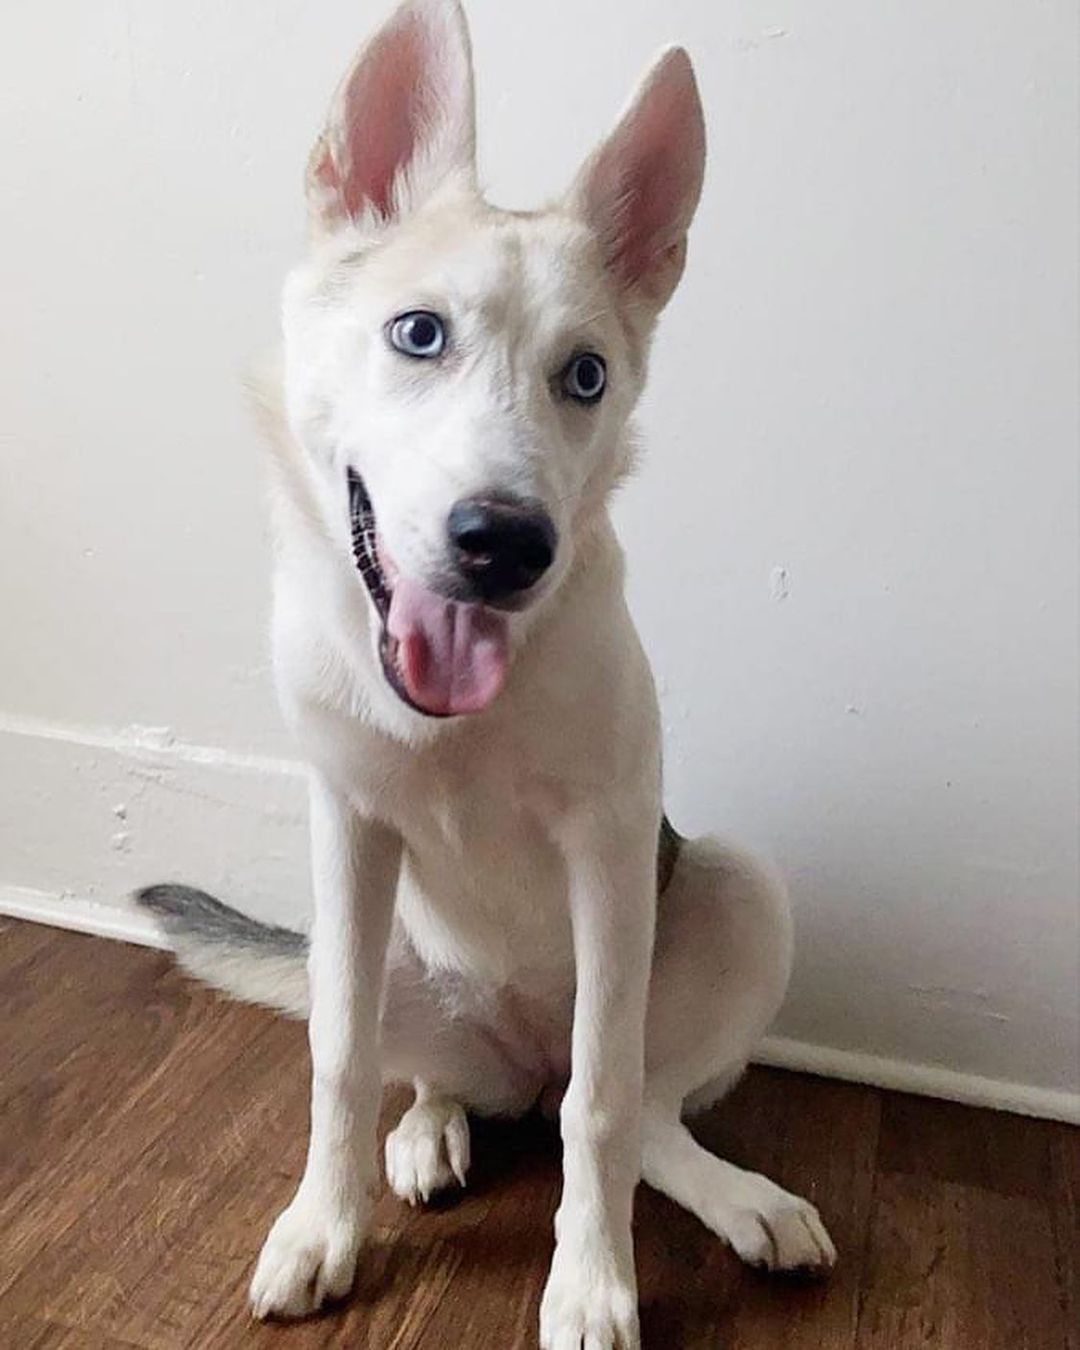 Adopt Azula! 💙🦋
・・・
My name means “blue” (pronounced ah-soo-la) for my beautiful blue eyes, and I'm only 7 months old. 🐾 I’m looking for my forever home after my dad and mom suddenly moved out of the country and left me in the good hands of the folks at Forte. I'm very playful, get along great with dogs and kids (working on learning cats at my foster home), and fully vaccinated and my spay surgery is scheduled. I'm still learning some basics, but you'll be very impressed with how smart I am 🤓
・・・
www.adoptapet.com/pet/33178203
(Link in bio)
・・・
<a target='_blank' href='https://www.instagram.com/explore/tags/rescuedogsofinstagram/'>#rescuedogsofinstagram</a> <a target='_blank' href='https://www.instagram.com/explore/tags/forteanimalrescue/'>#forteanimalrescue</a> <a target='_blank' href='https://www.instagram.com/explore/tags/adoptdontshop/'>#adoptdontshop</a> <a target='_blank' href='https://www.instagram.com/explore/tags/rescuedog/'>#rescuedog</a> <a target='_blank' href='https://www.instagram.com/explore/tags/igdogs/'>#igdogs</a> #🐶